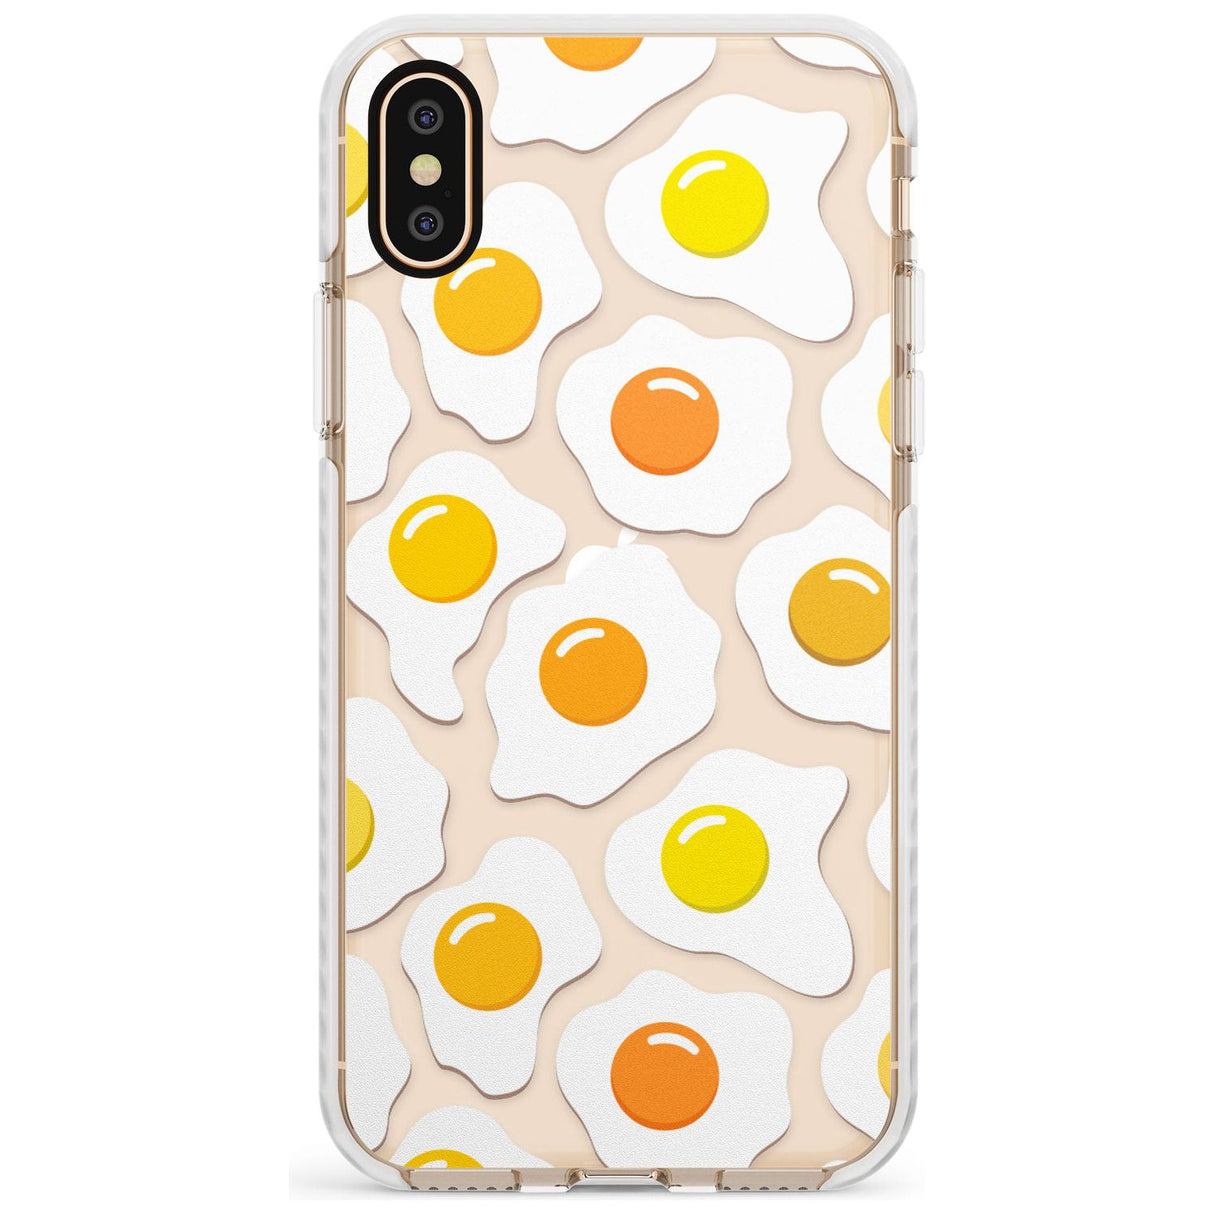 Fried Egg Pattern Impact Phone Case for iPhone X XS Max XR